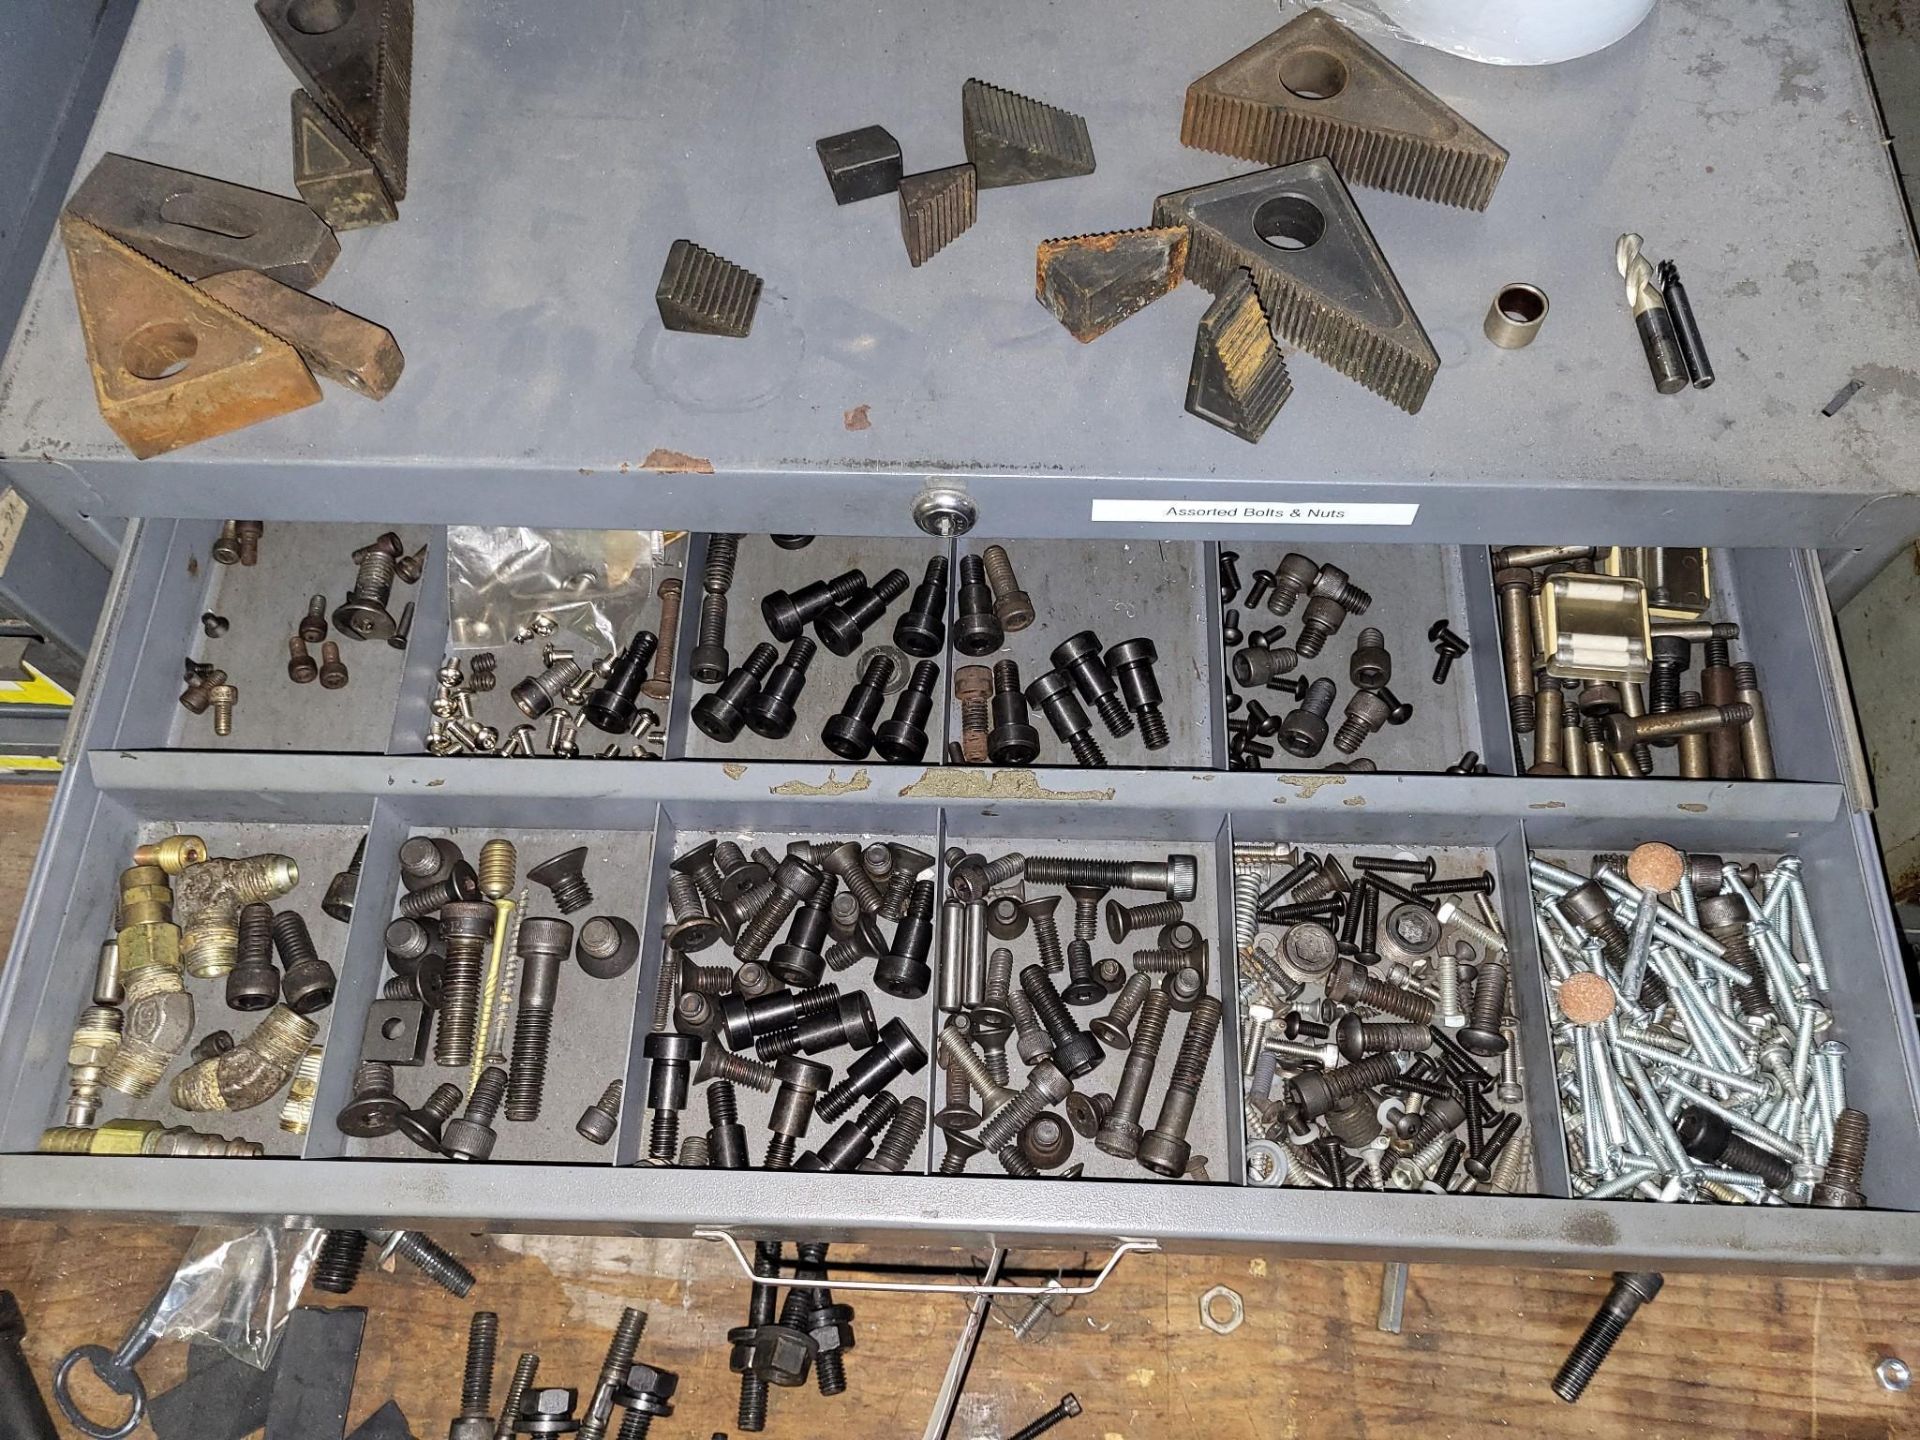 LARGE LOT OF MILLING TOOLS, TAPS, CARBIDE INSERTS, SETUP HARDWARE AND HAND TOOLS - Image 17 of 24